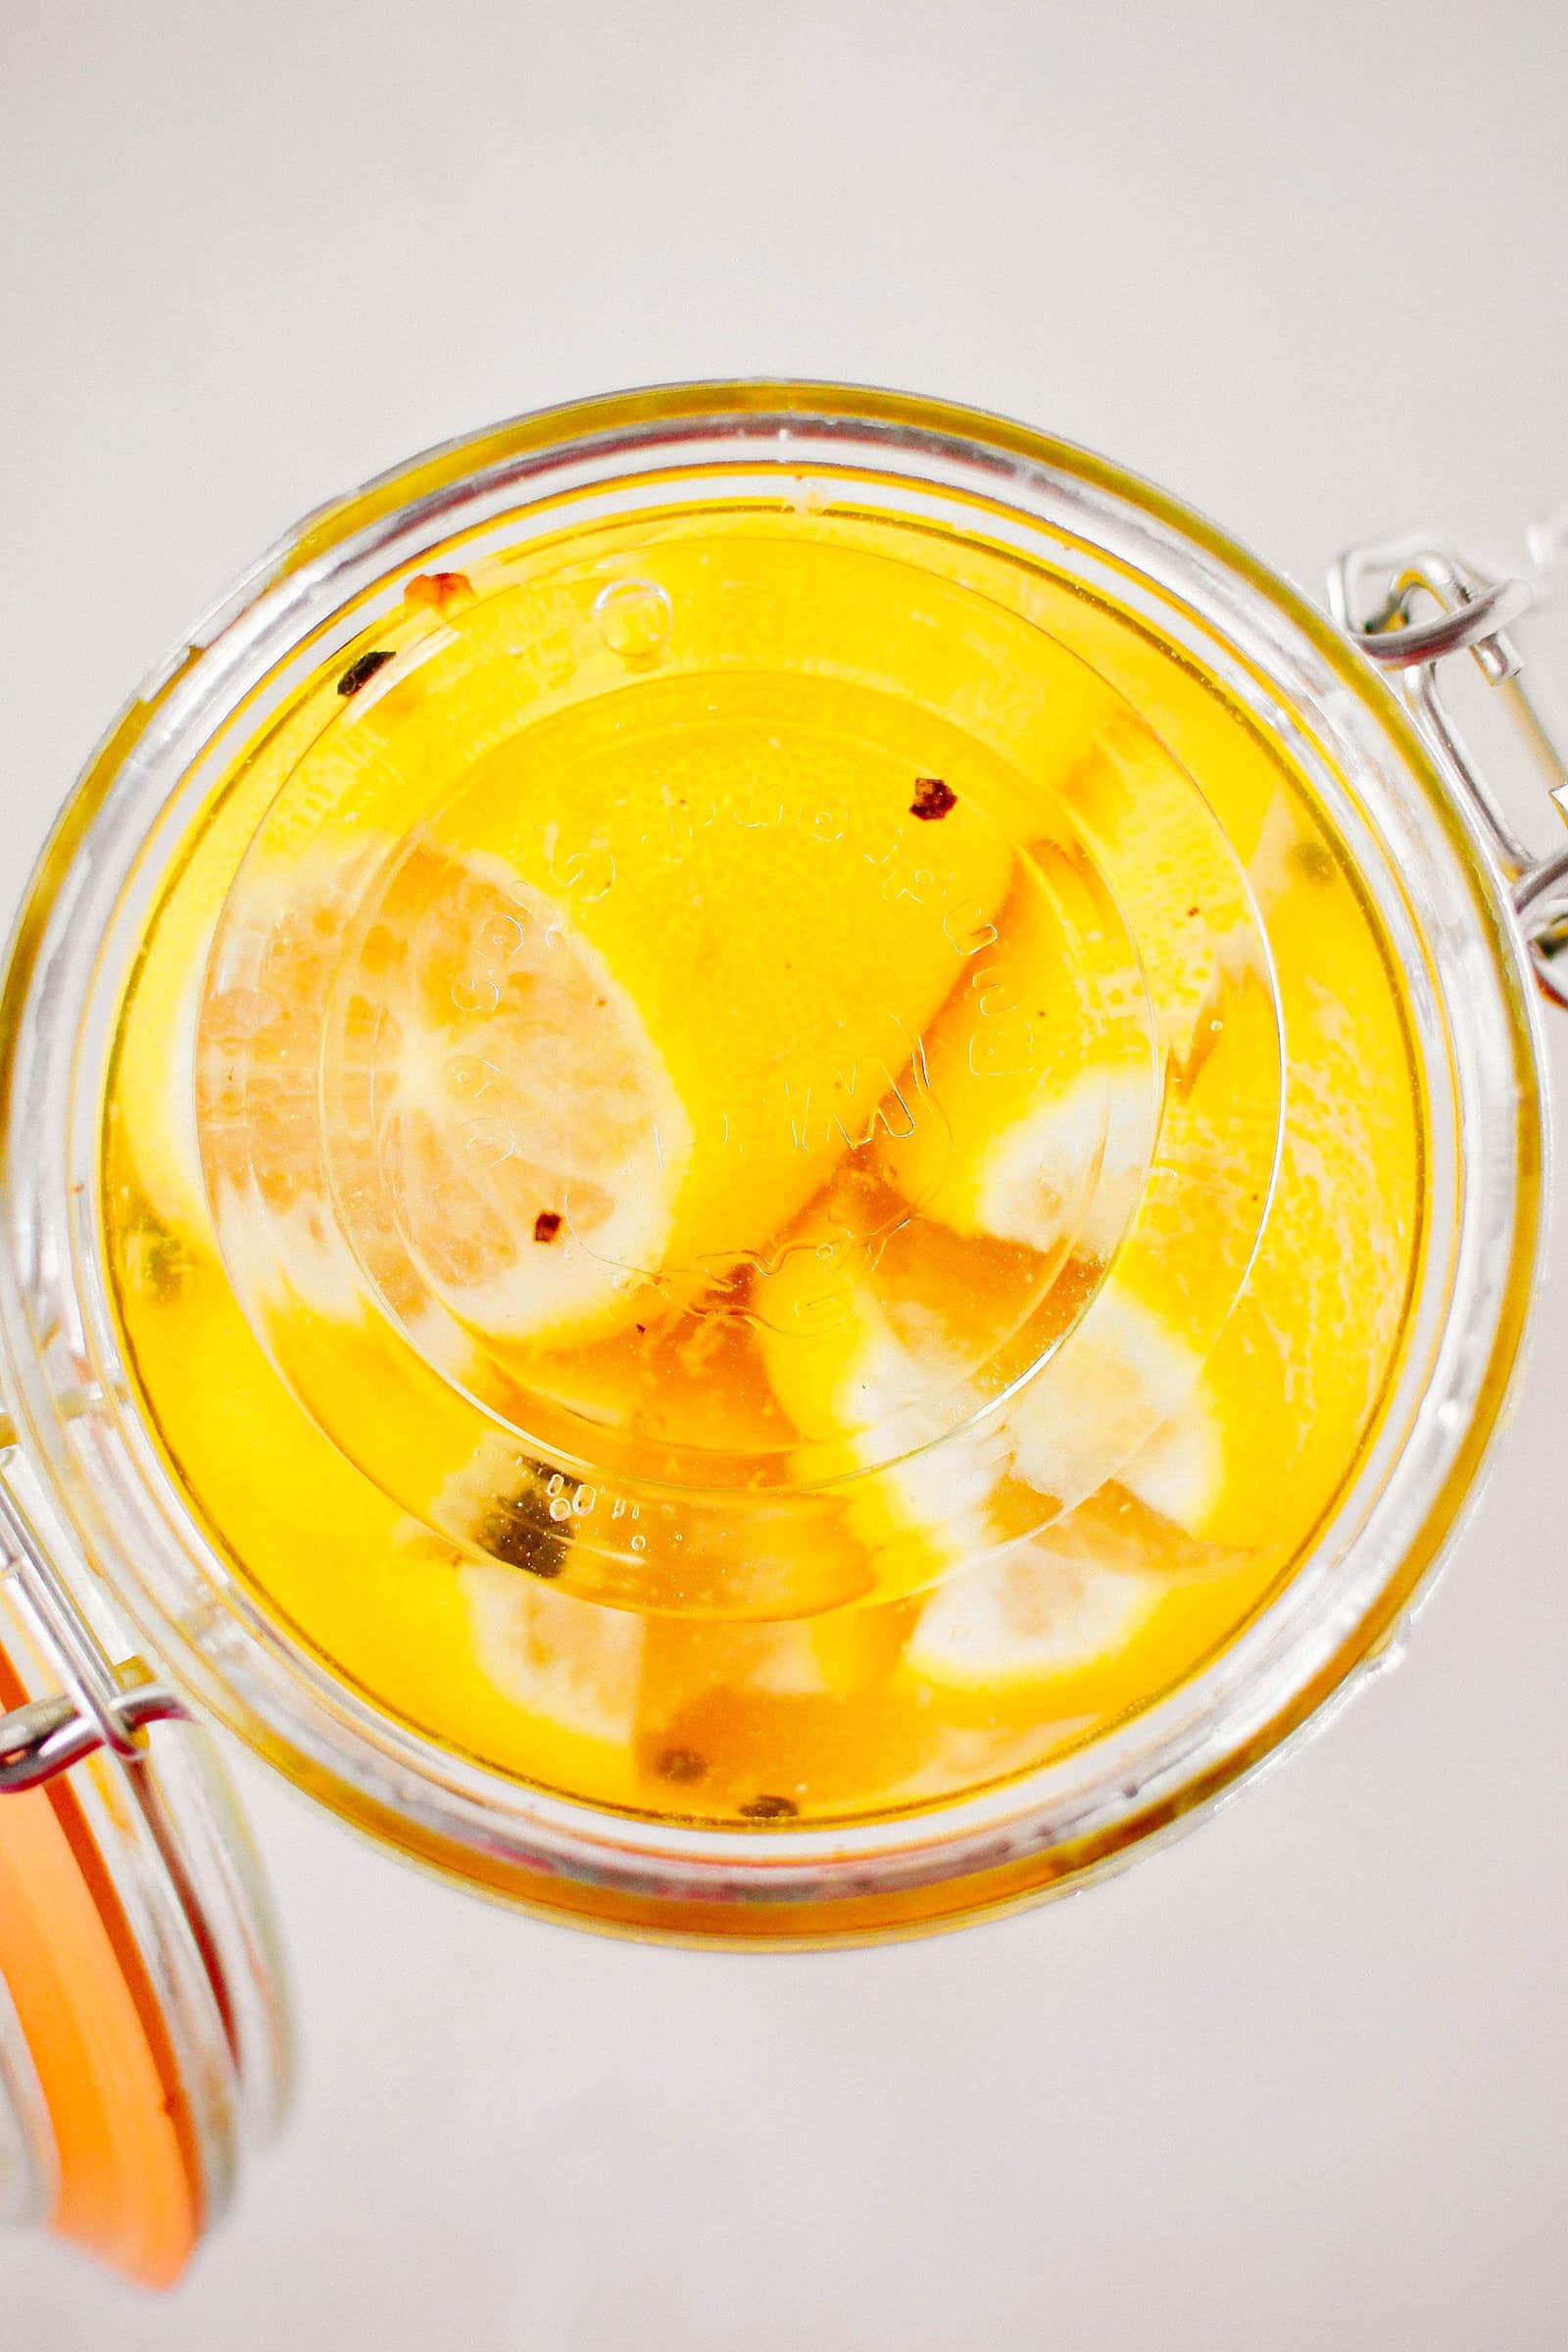 Close-up view of a glass weight inside a jar, keeping lemons submerged in brine